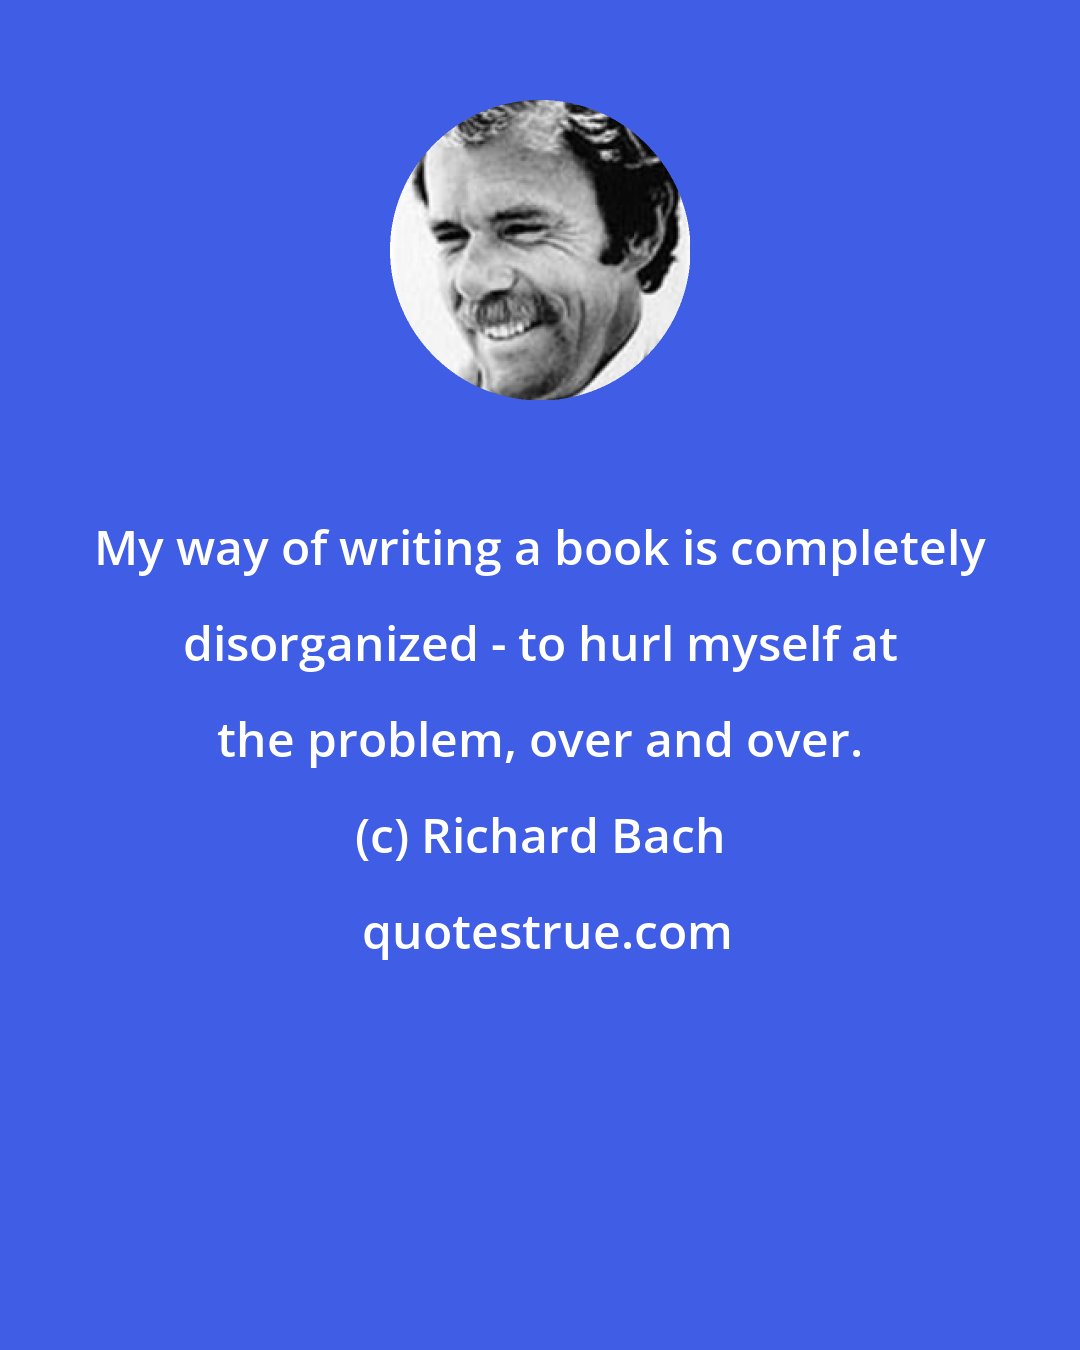 Richard Bach: My way of writing a book is completely disorganized - to hurl myself at the problem, over and over.